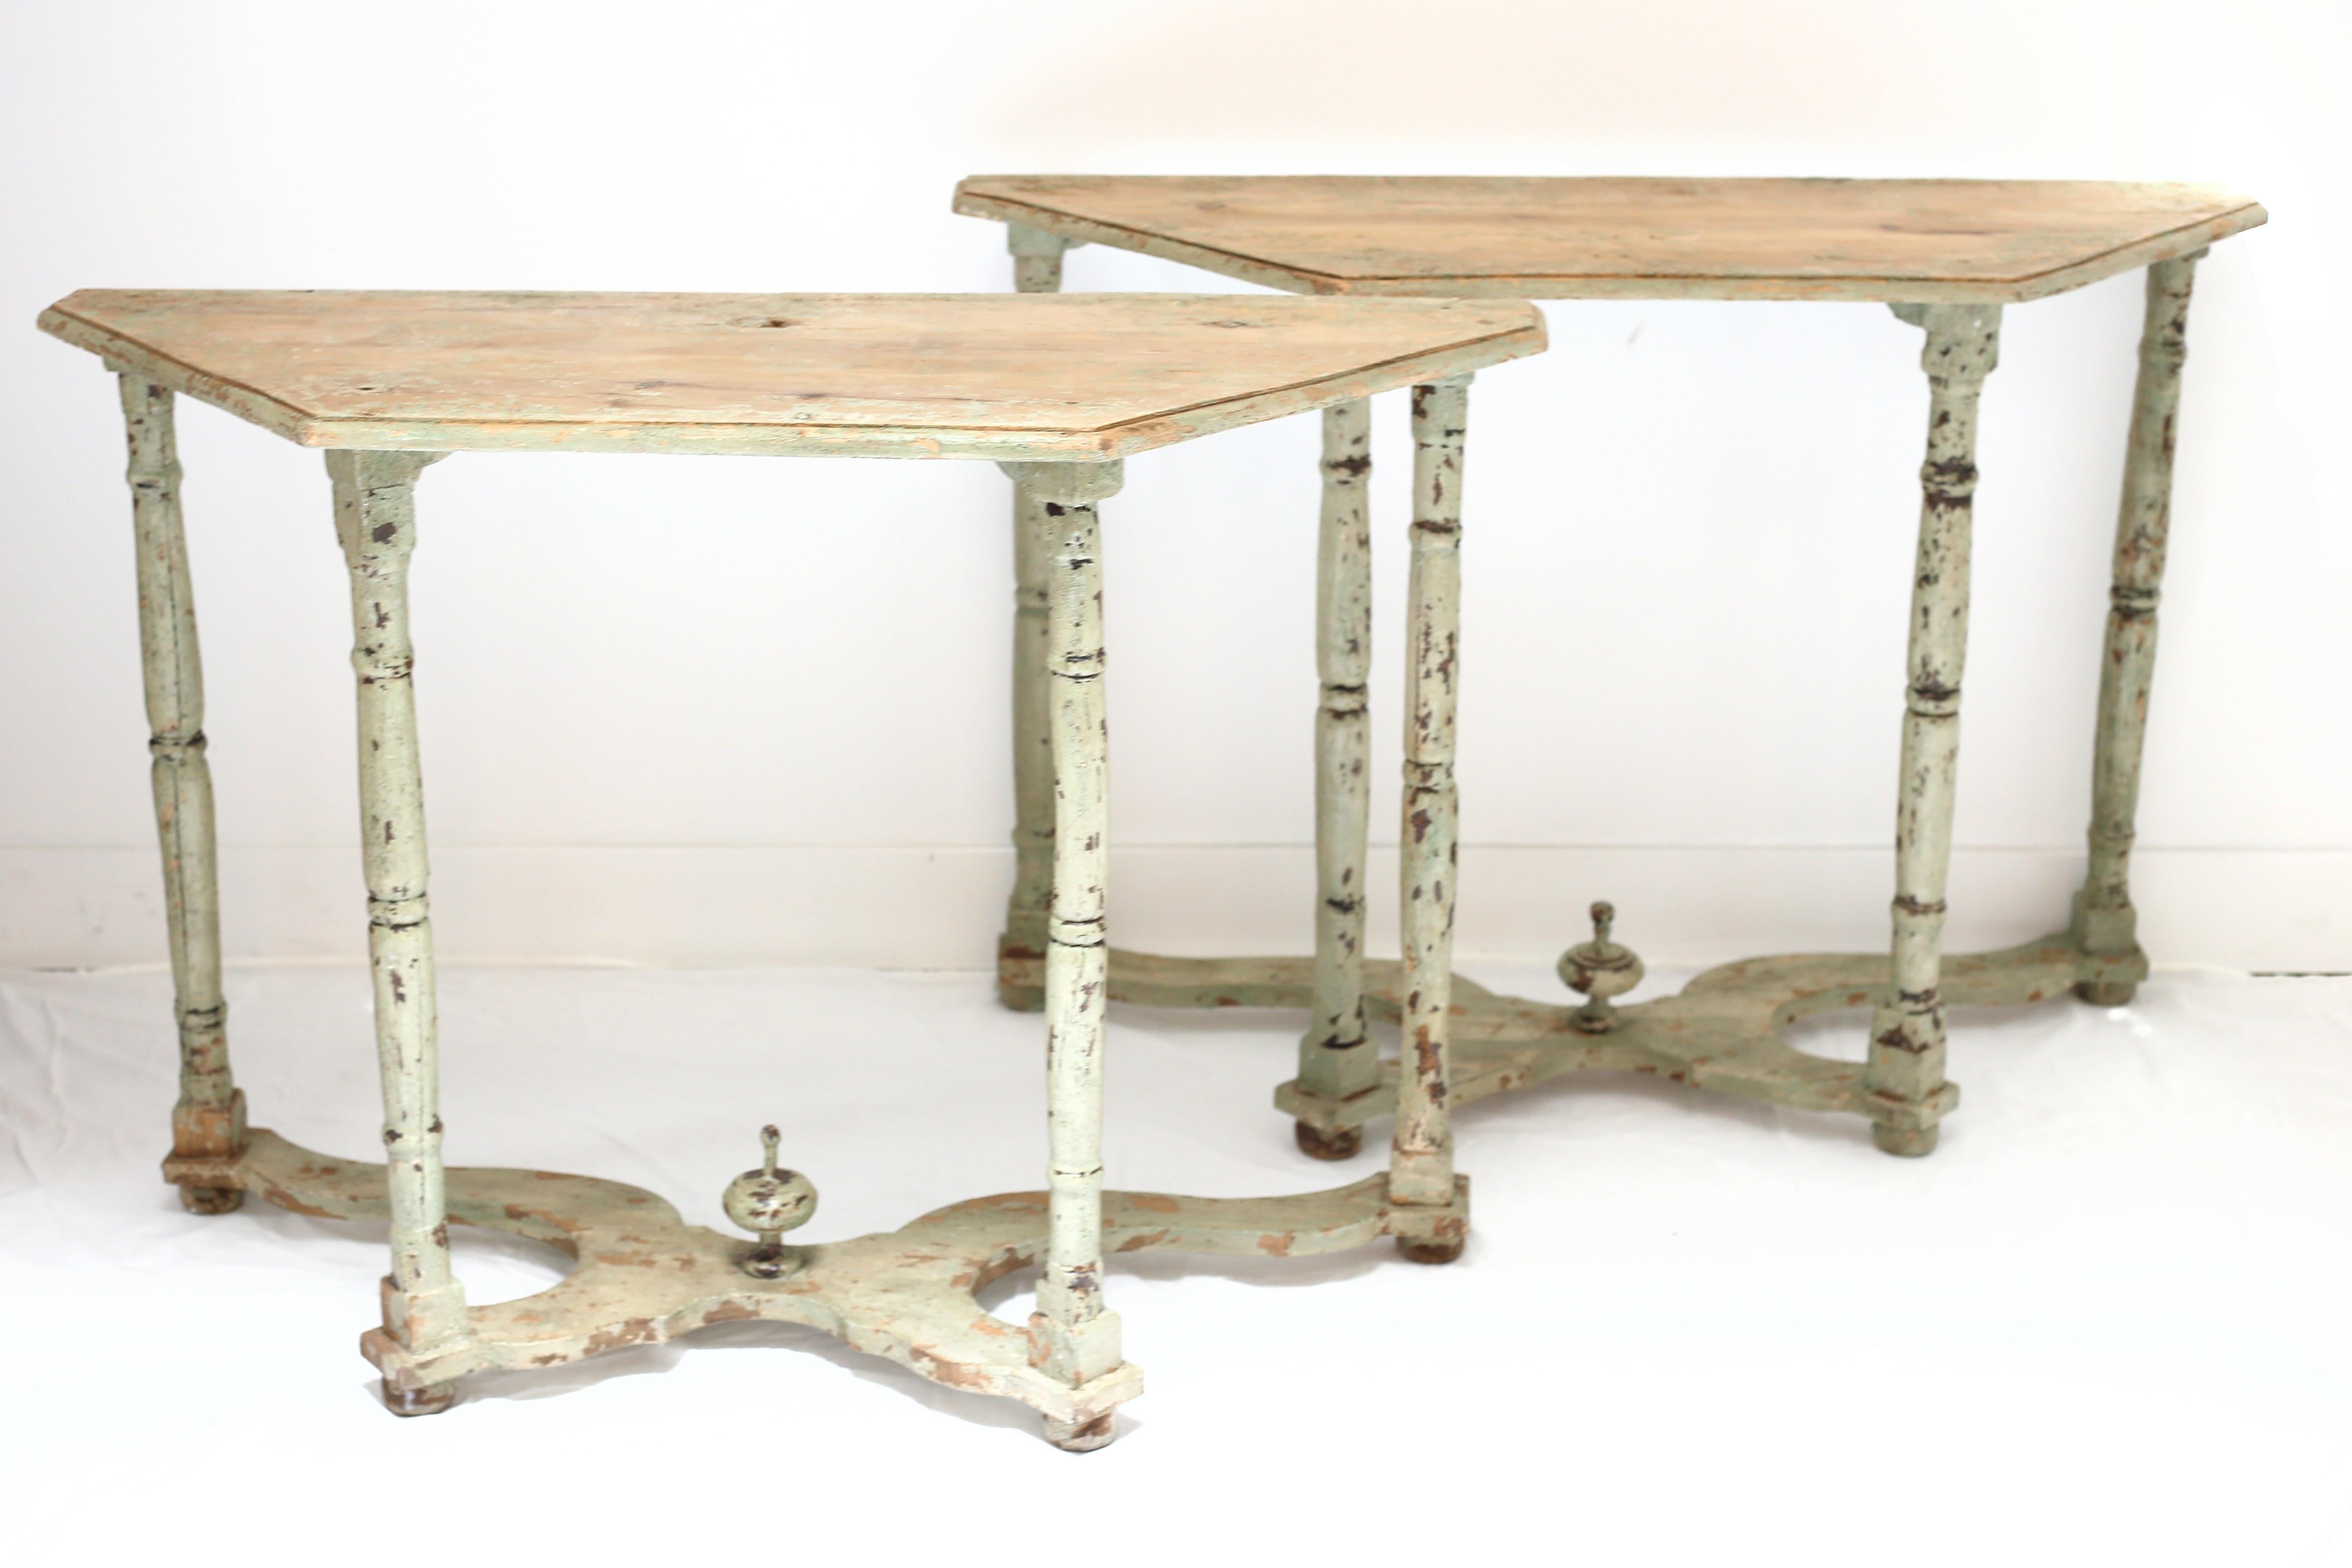 Pair of European vintage console tables with chippy, distressed pale green paint finish. Curved stretcher and finial detail on the base.
